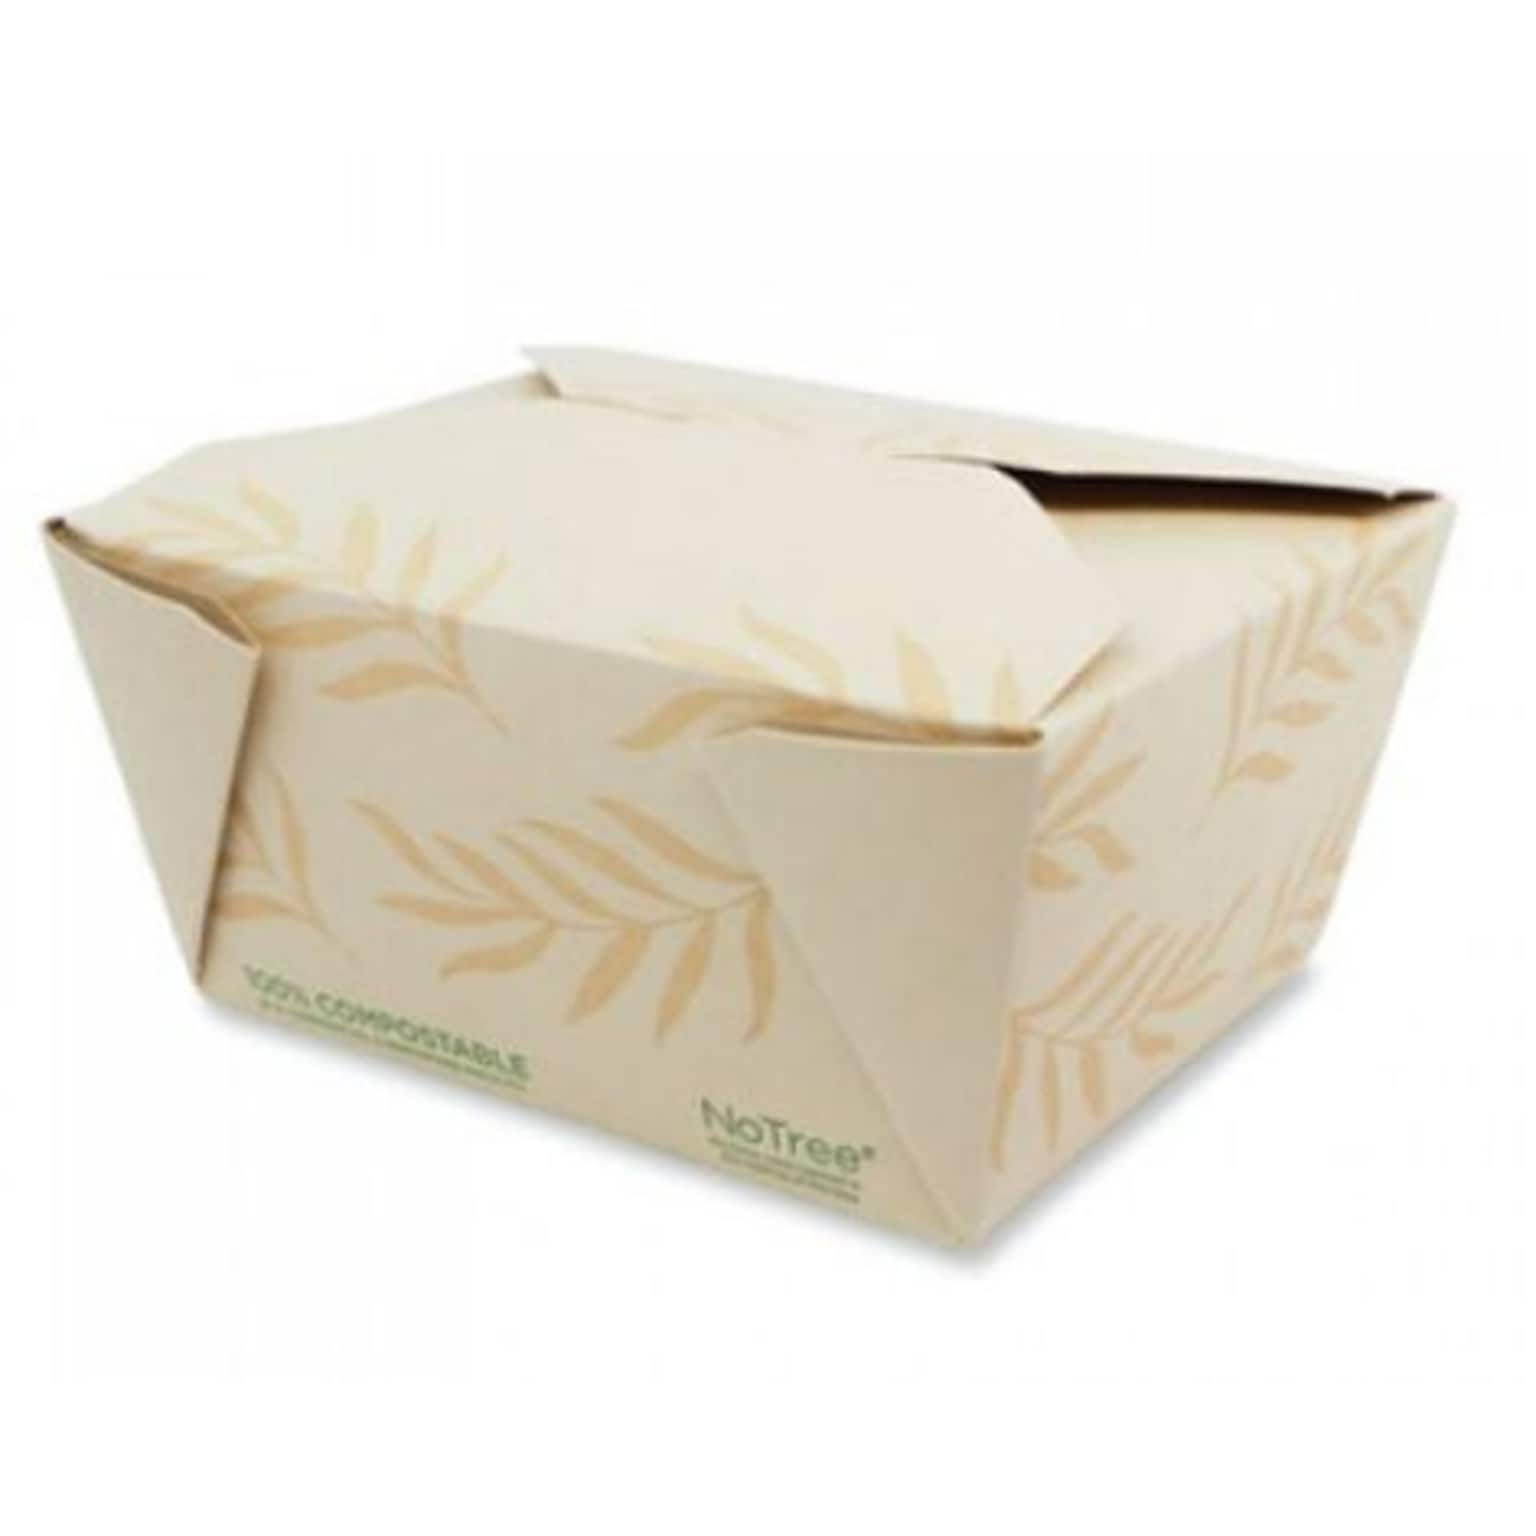 World Centric No Tree Sugercane Takeout Container, 26 oz., Natural, 450/Carton (WORTONT1)